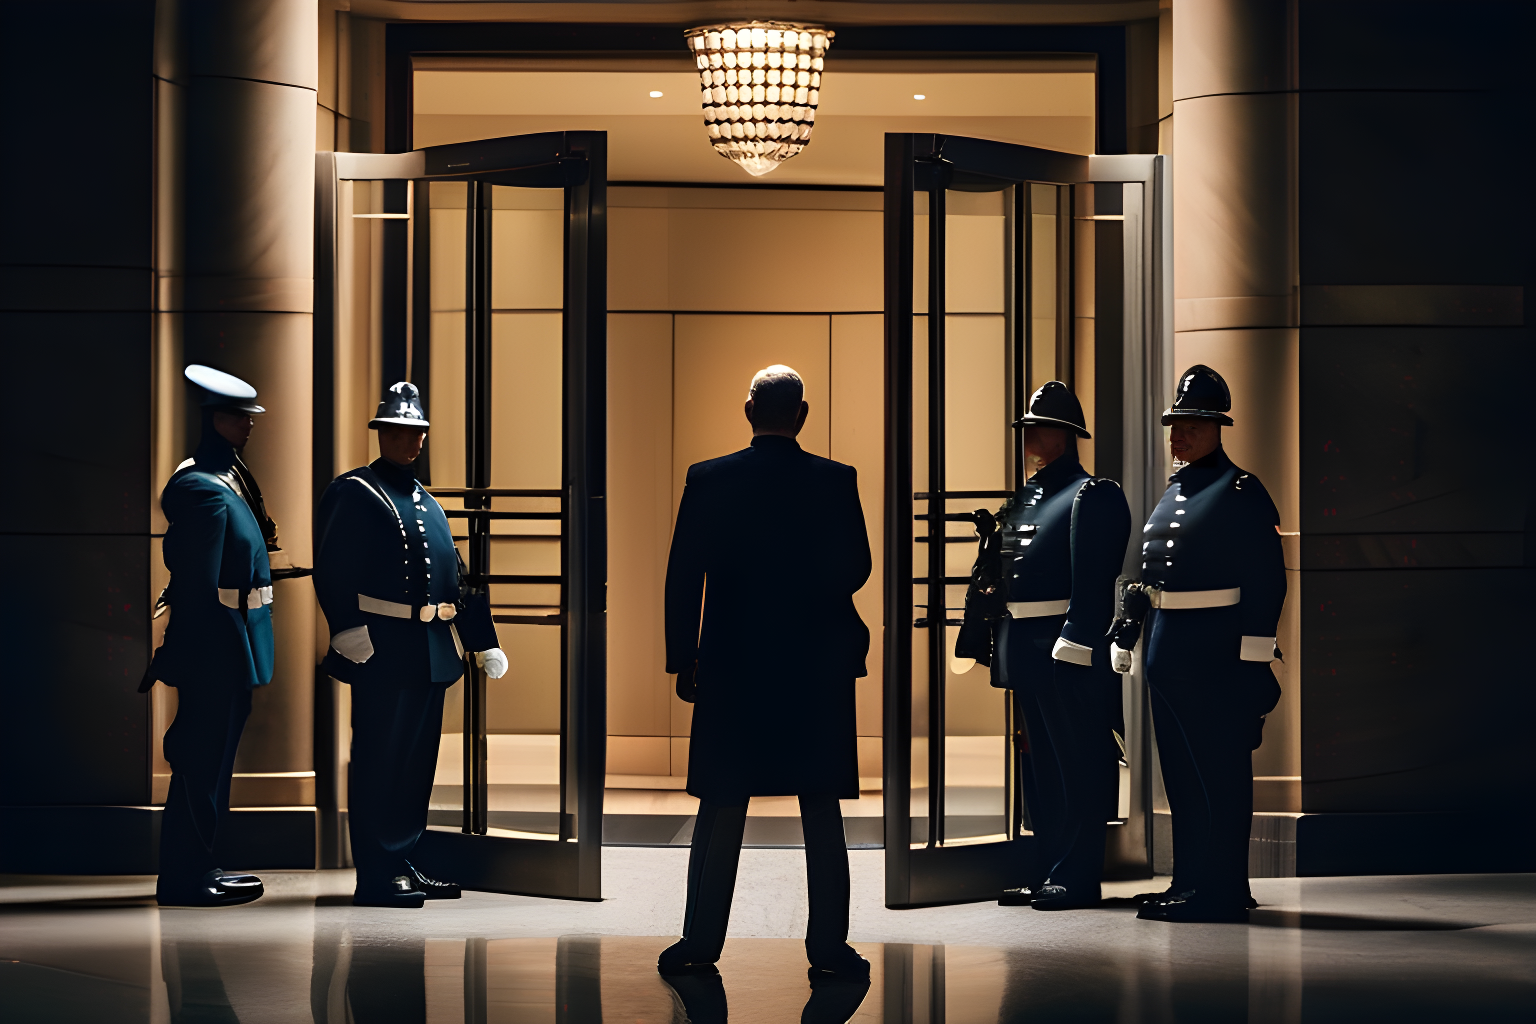 Breathtaking photograph of a restricted man, held back by guards from leaving a hotel building. award-winning, professional, highly detailed